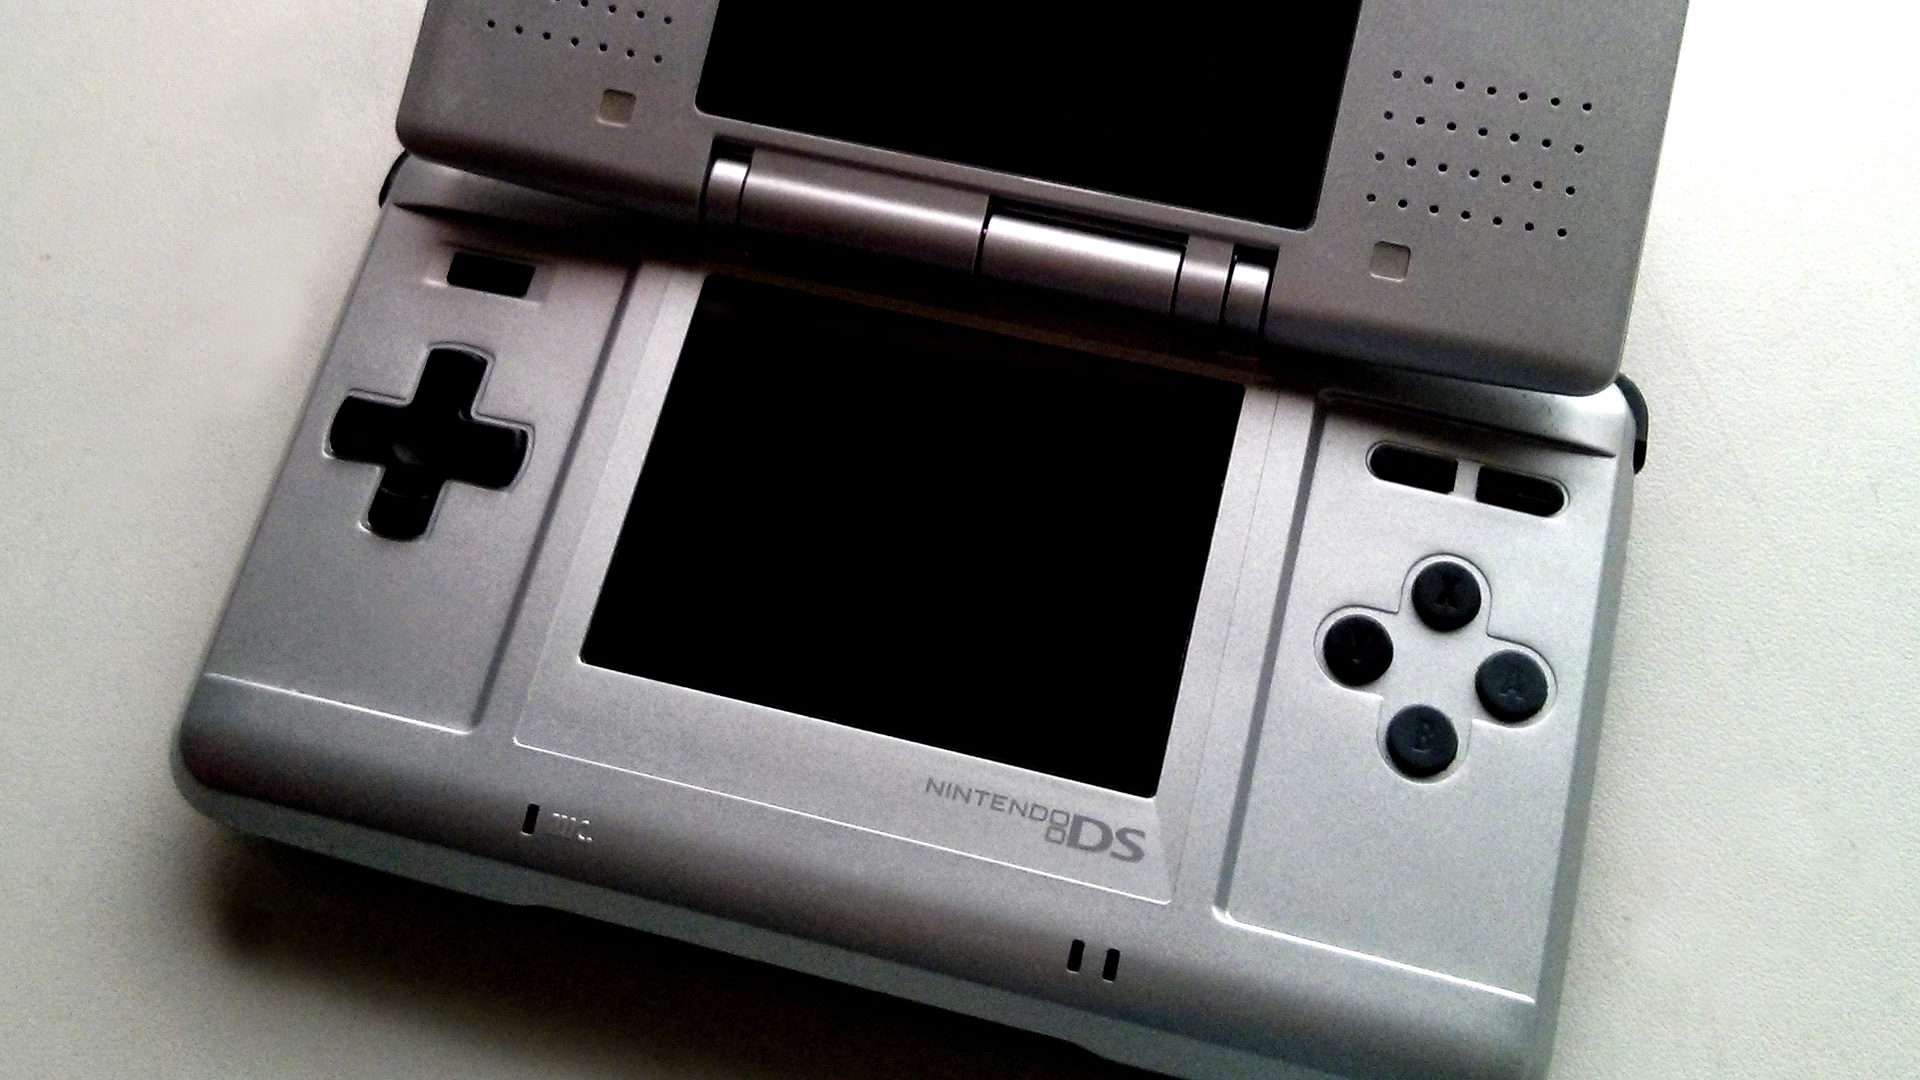 The 15 Best Nintendo DS Games of All Time